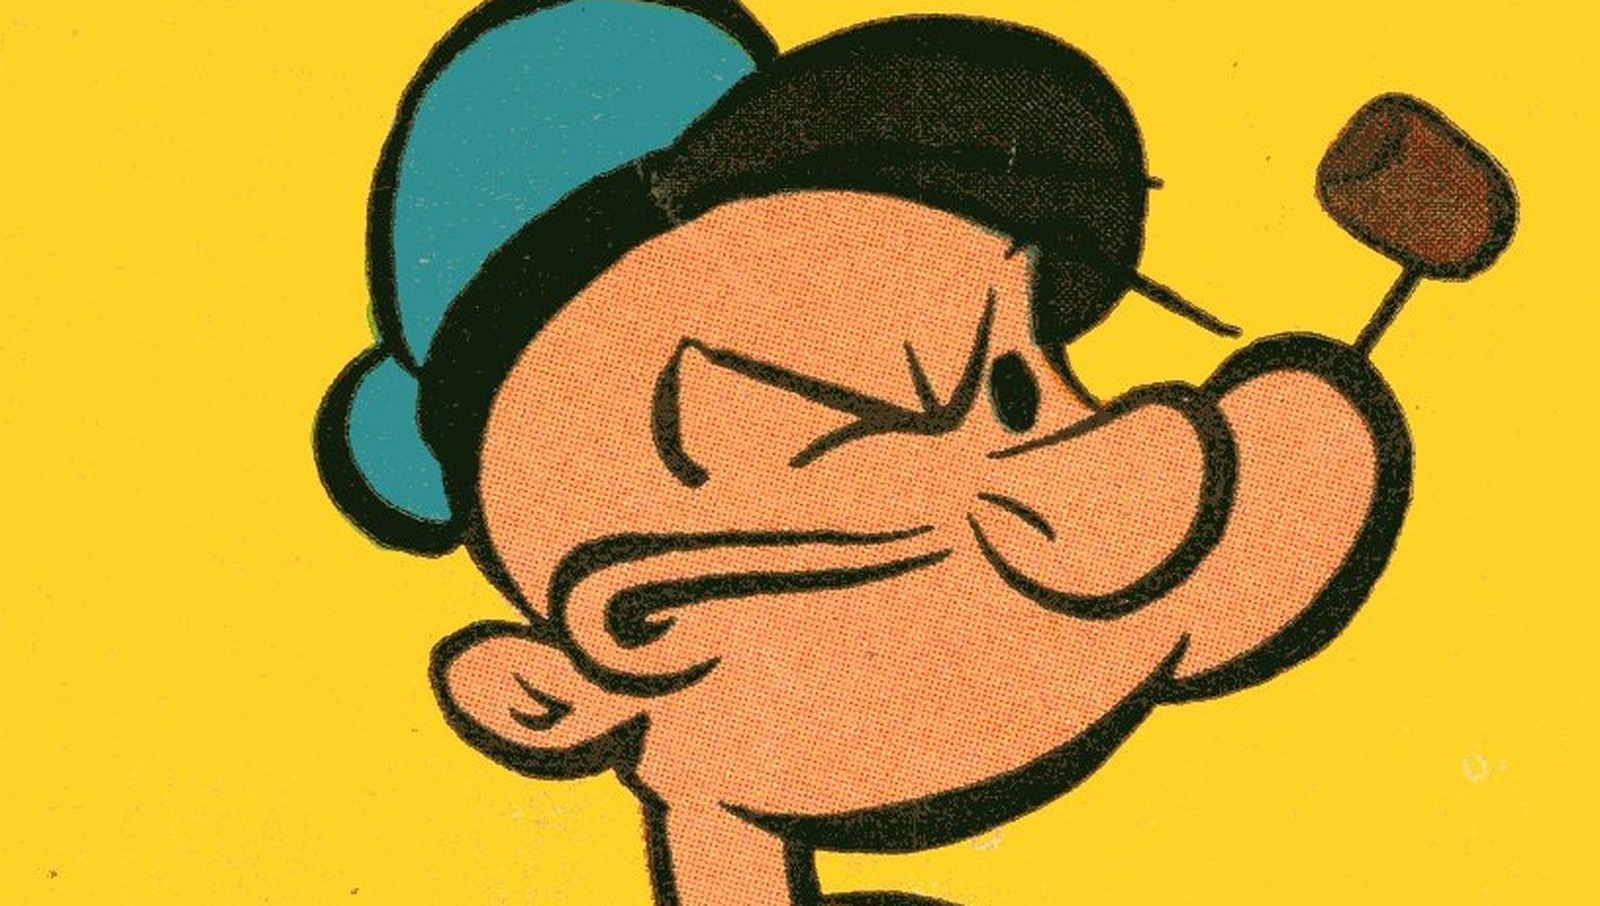 Replacements Cartoon Porn Pee - The Untold Truth Of Popeye